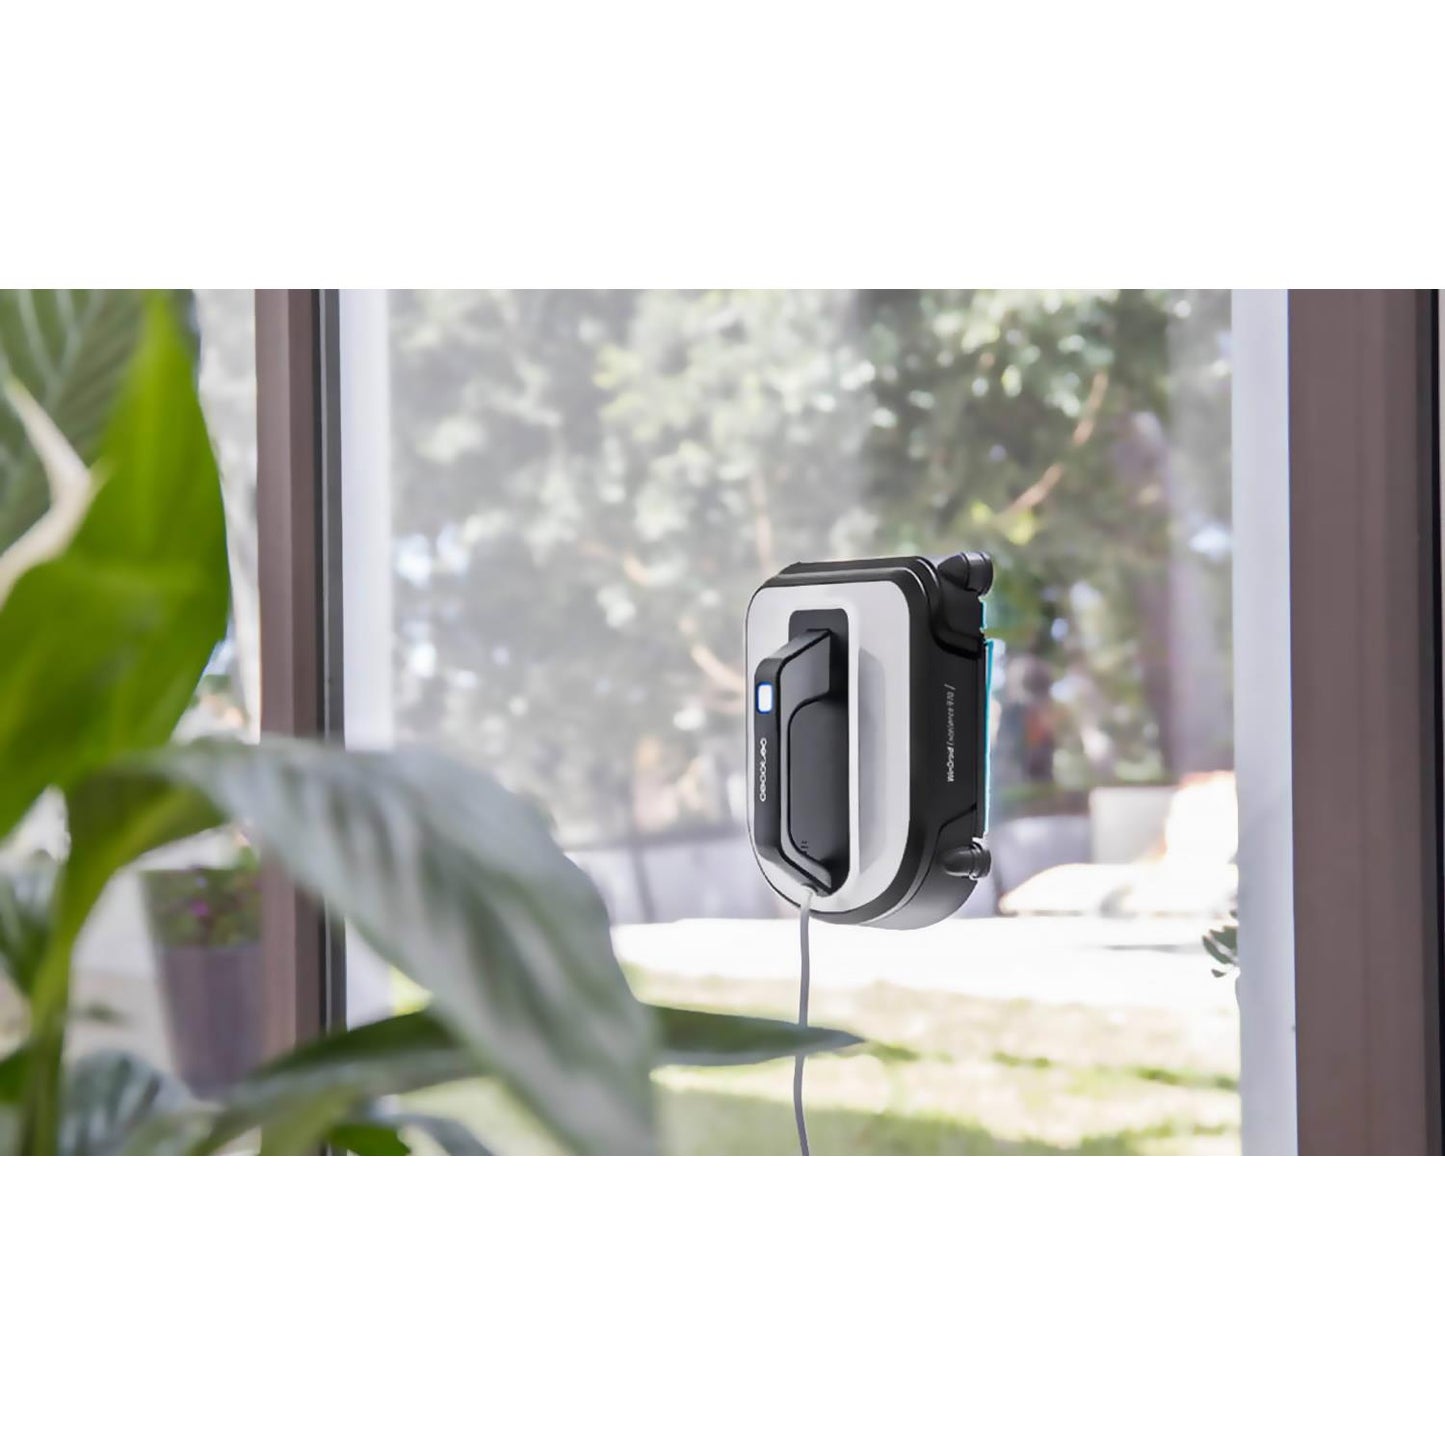 Electric Smart Robot Window Cleaner For Automatic Cleaning